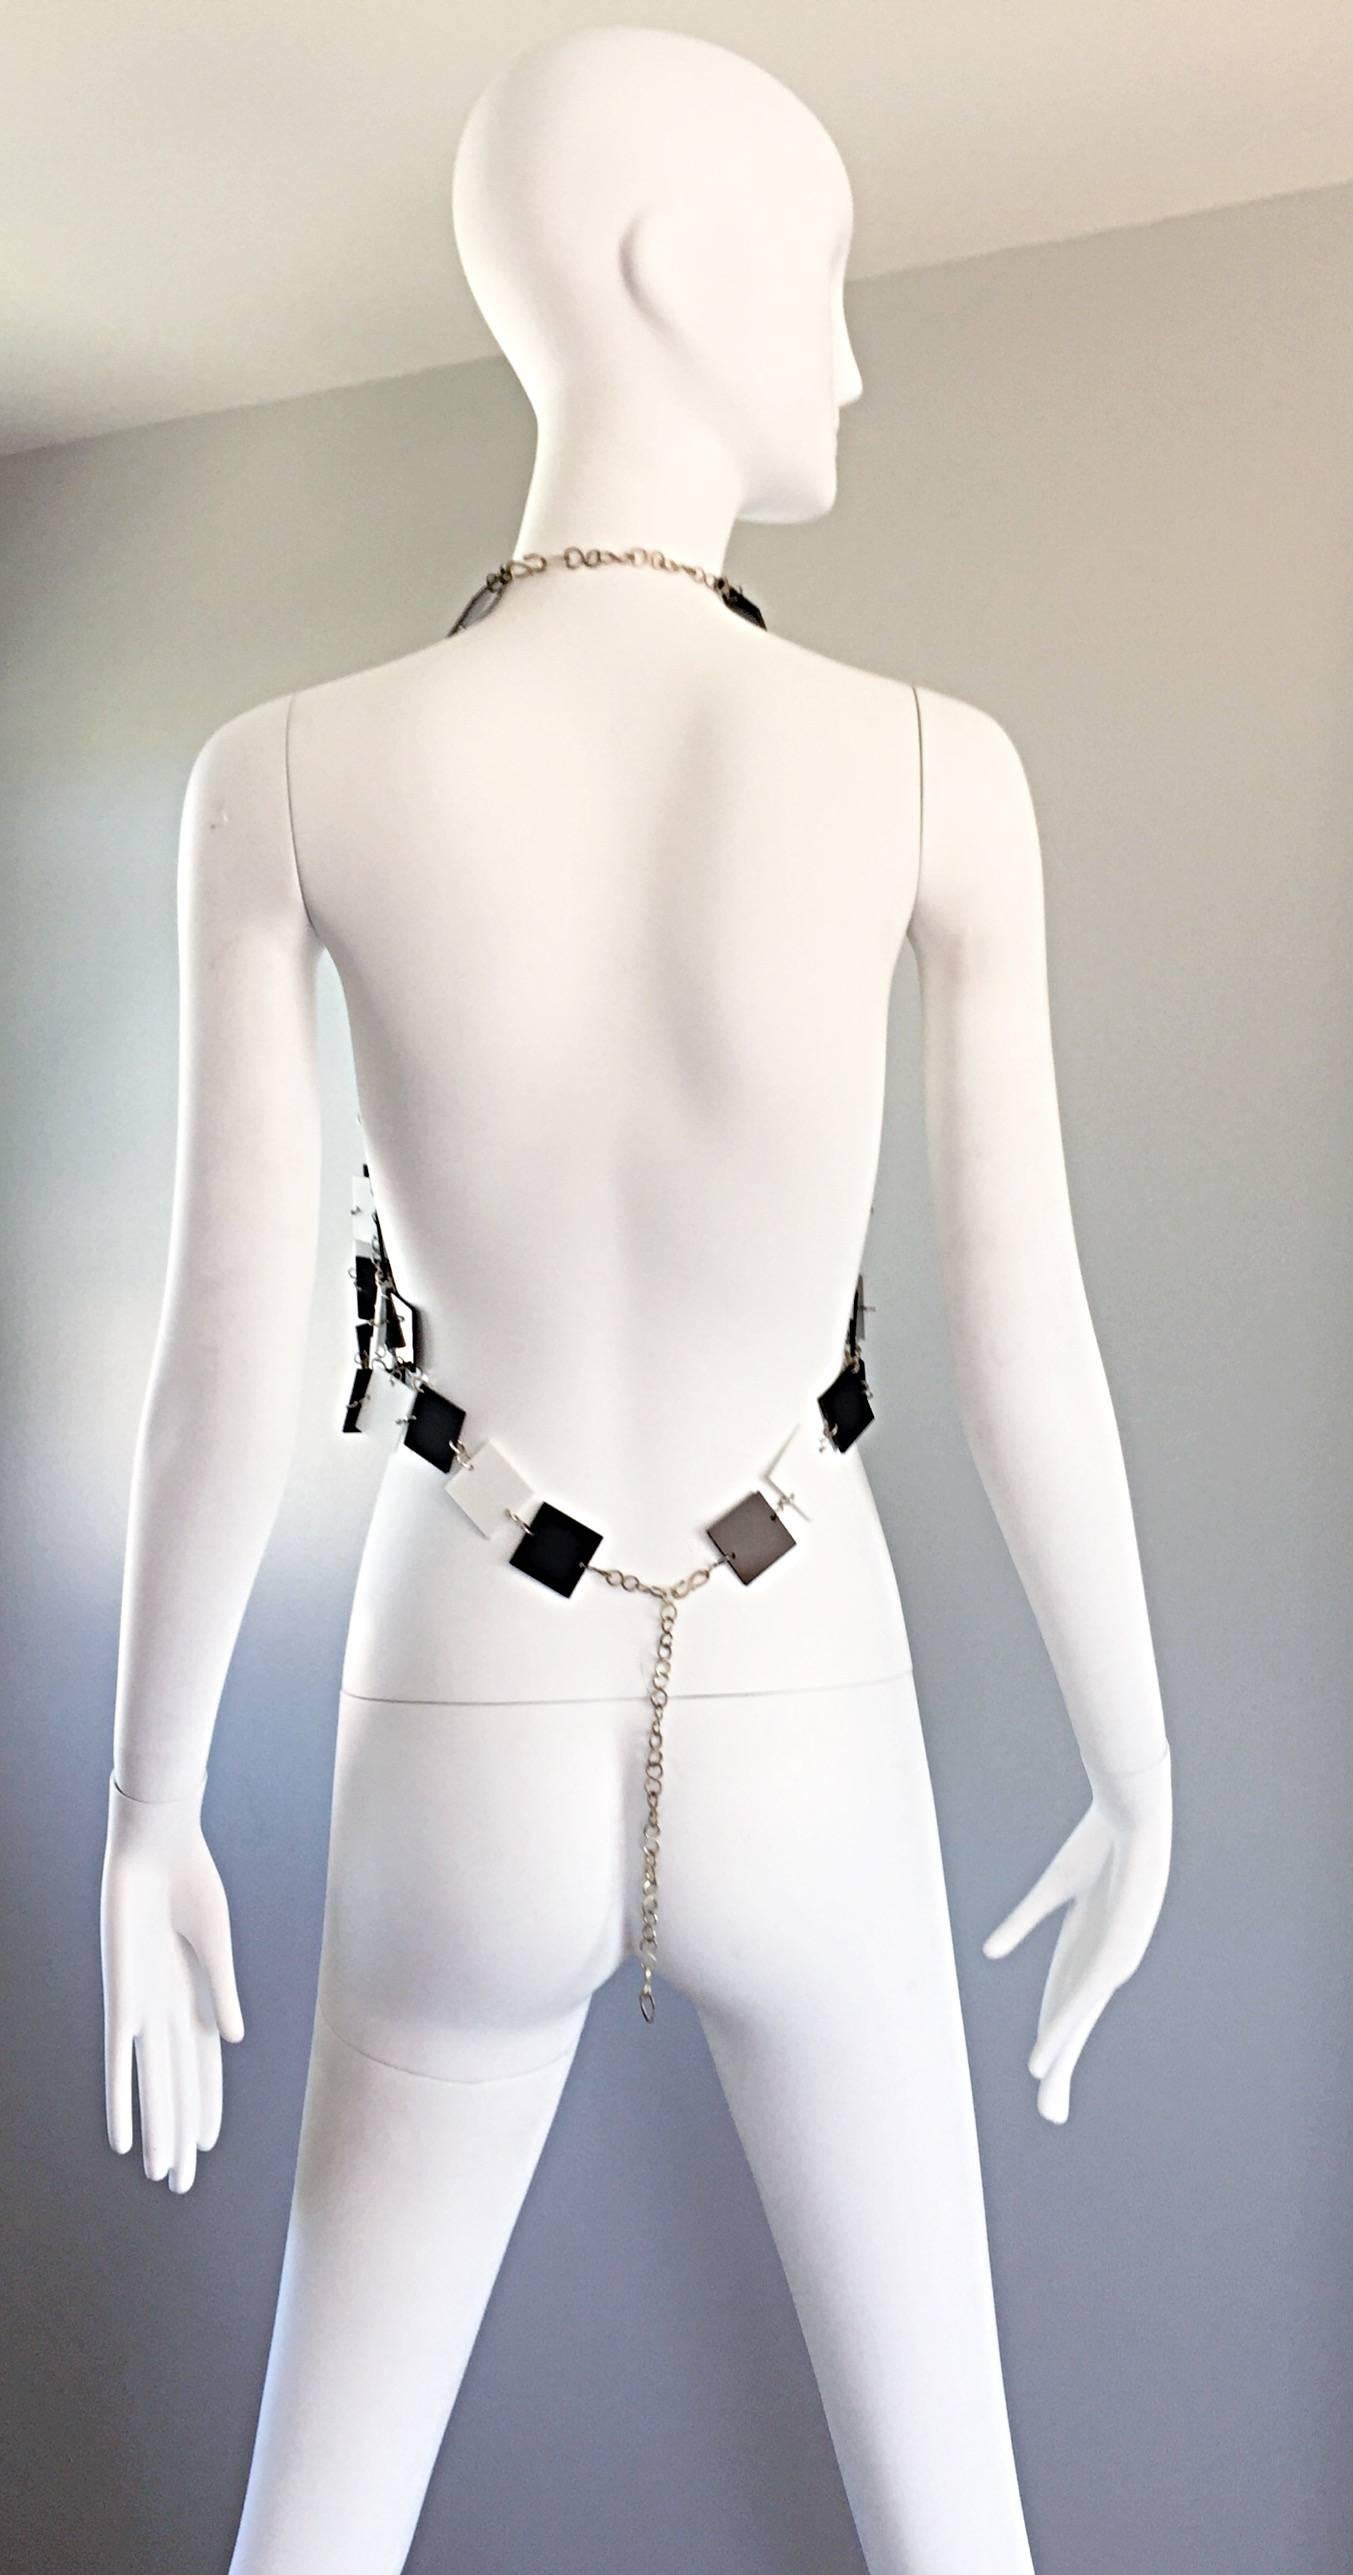 Paco Rabanne Black and White Acrylic Vintage Halter Crop Top, 1960s For Sale 1